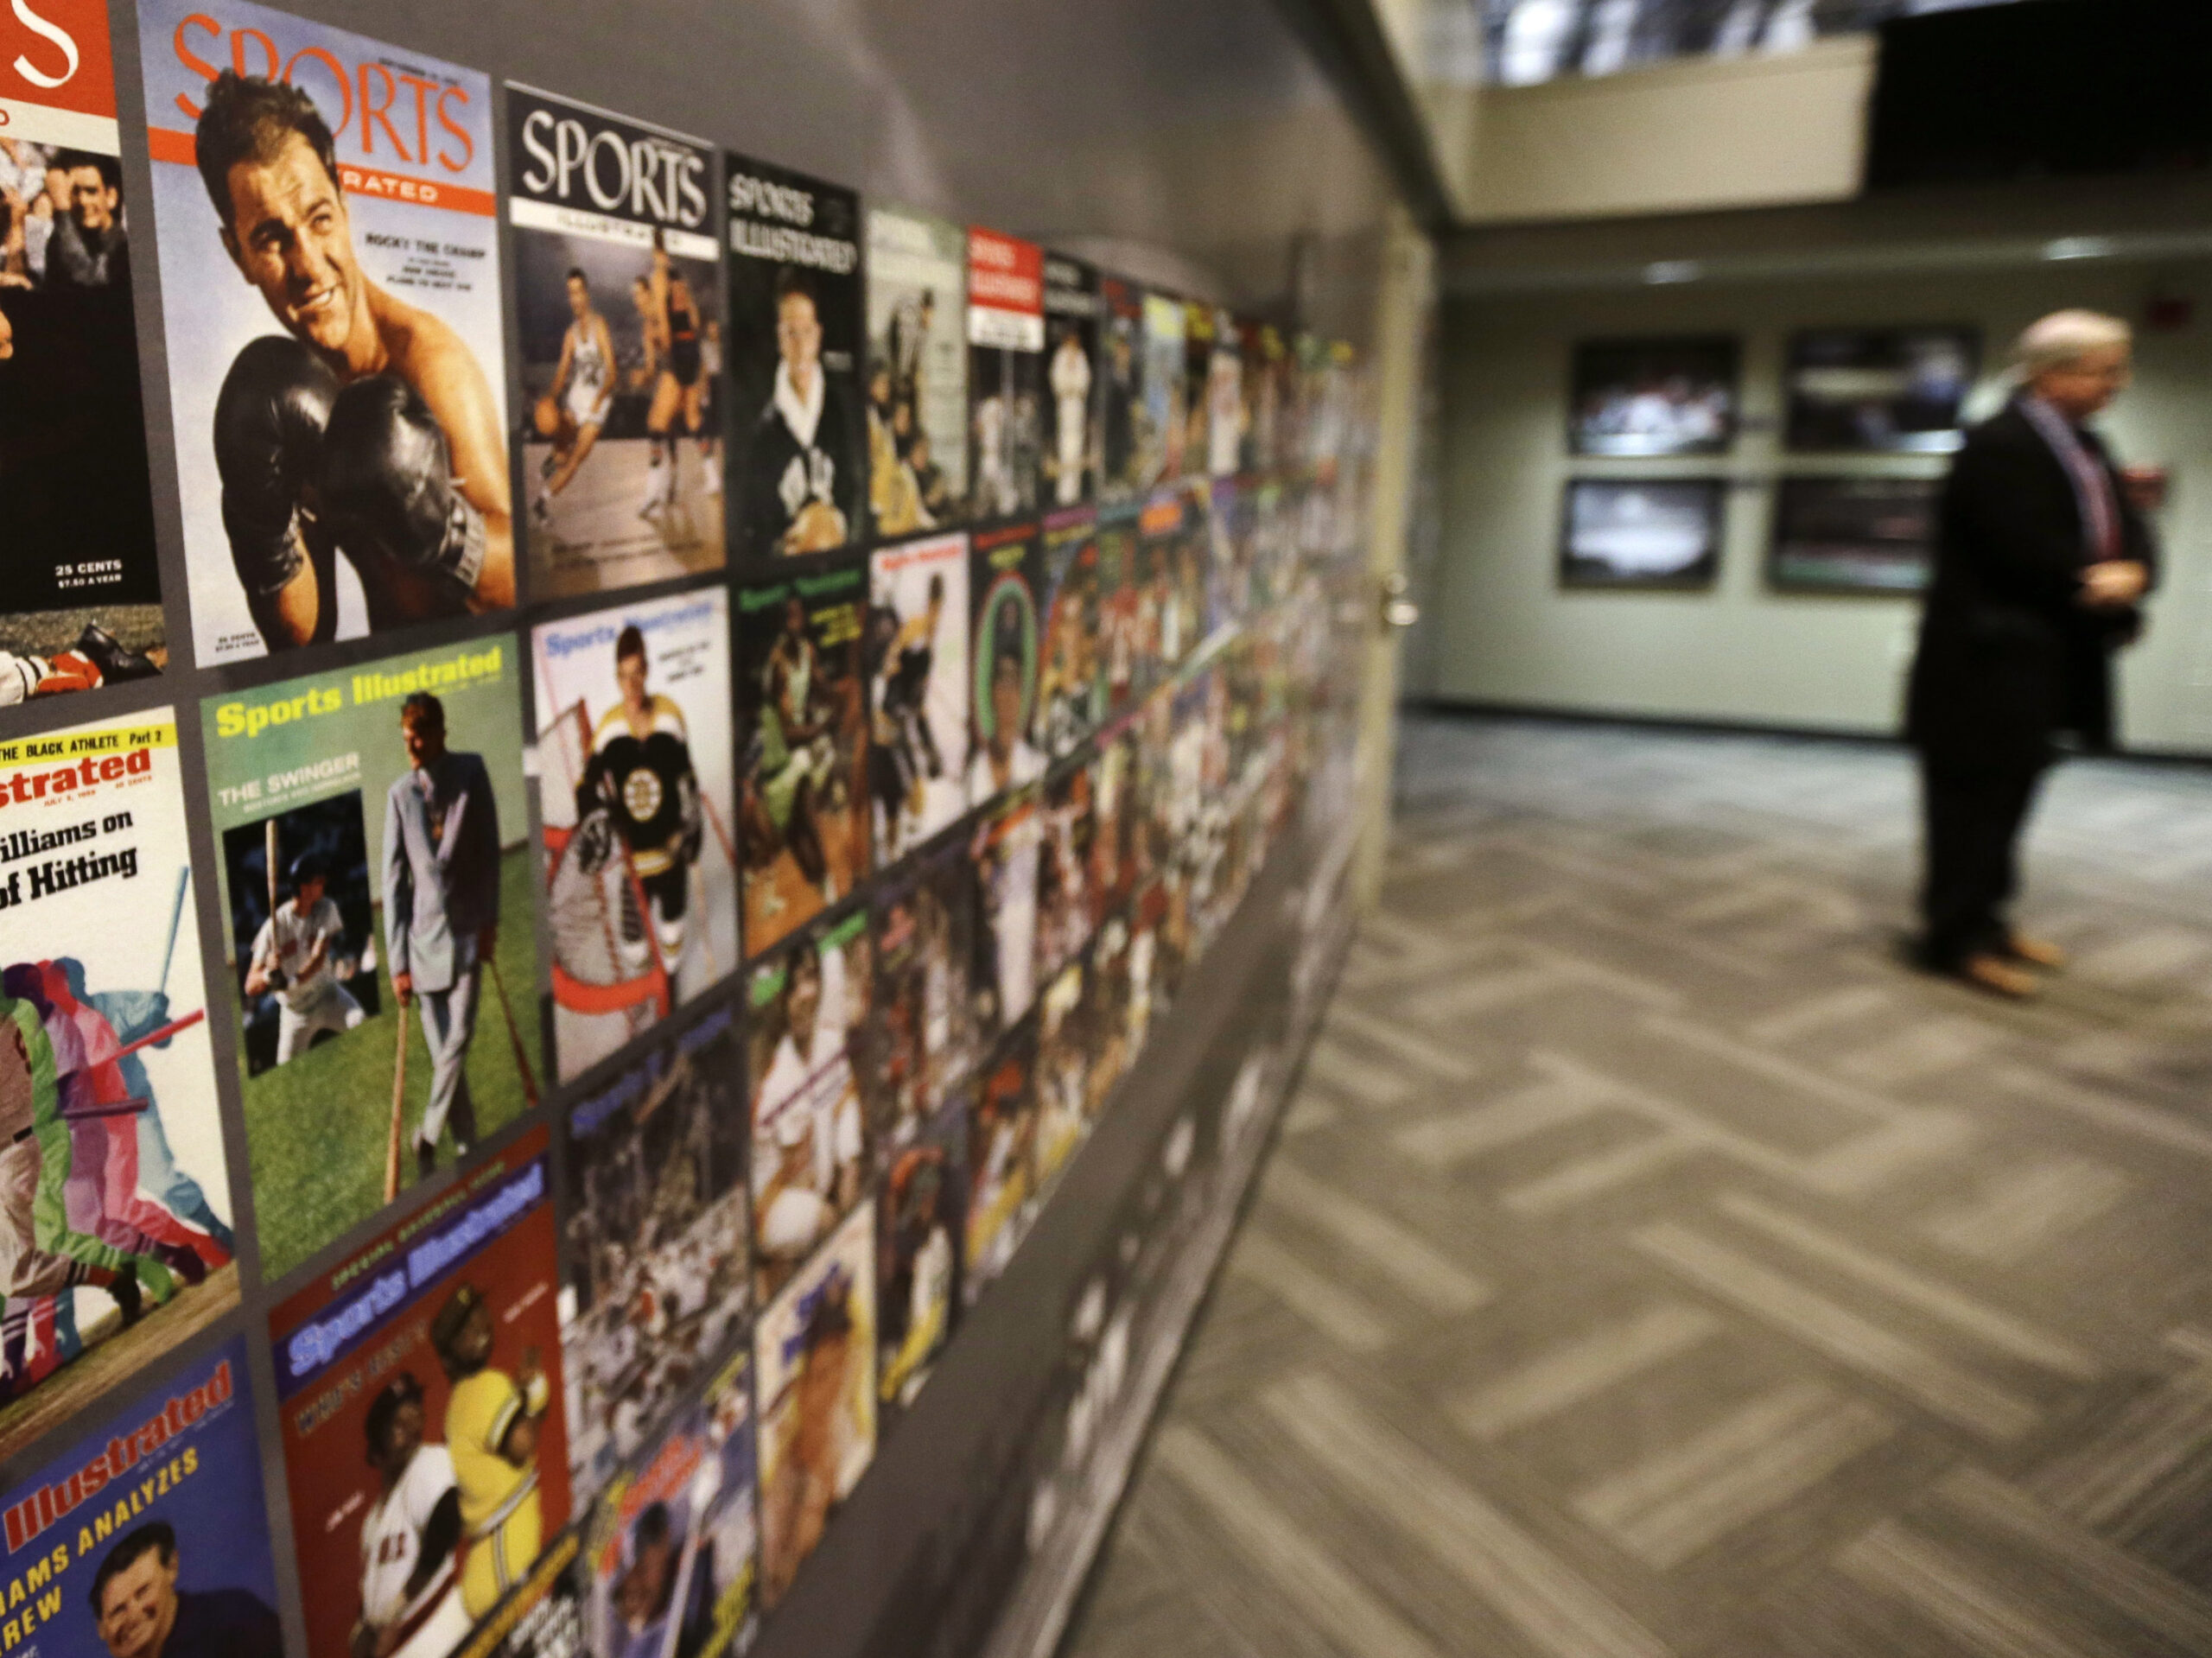 Sports Illustrated will continue its print edition under a new publisher